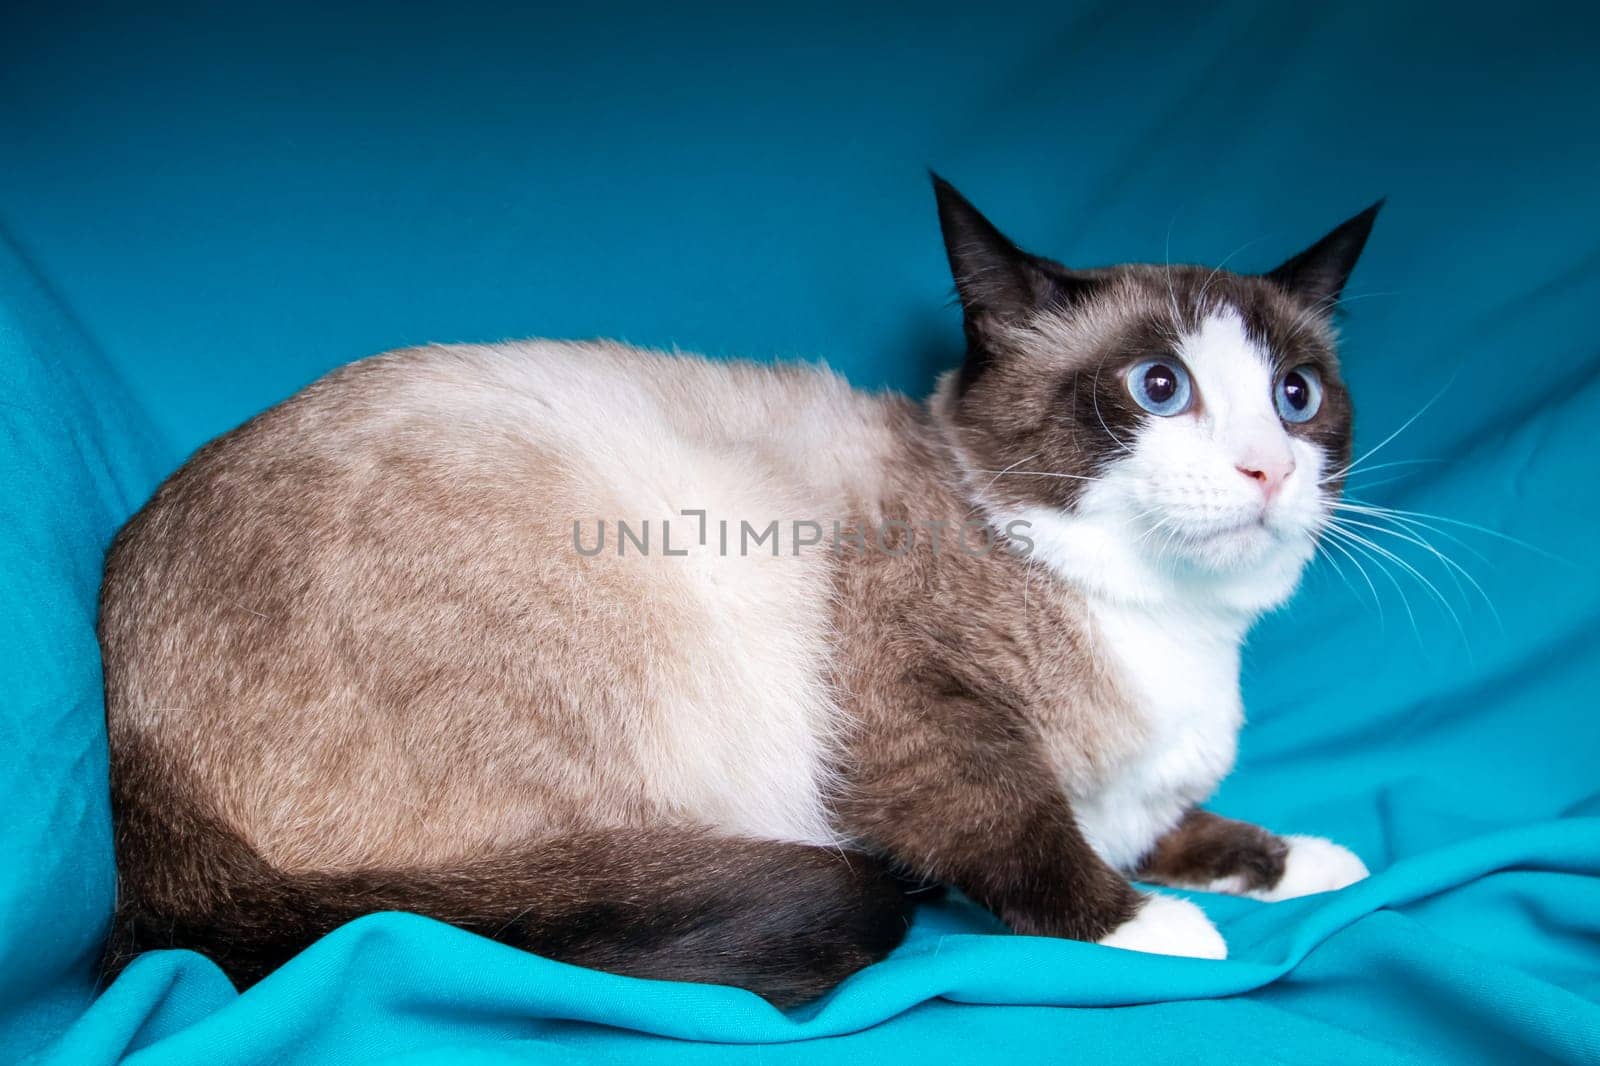 Gray cat with blue eyes portrait on blue background close up